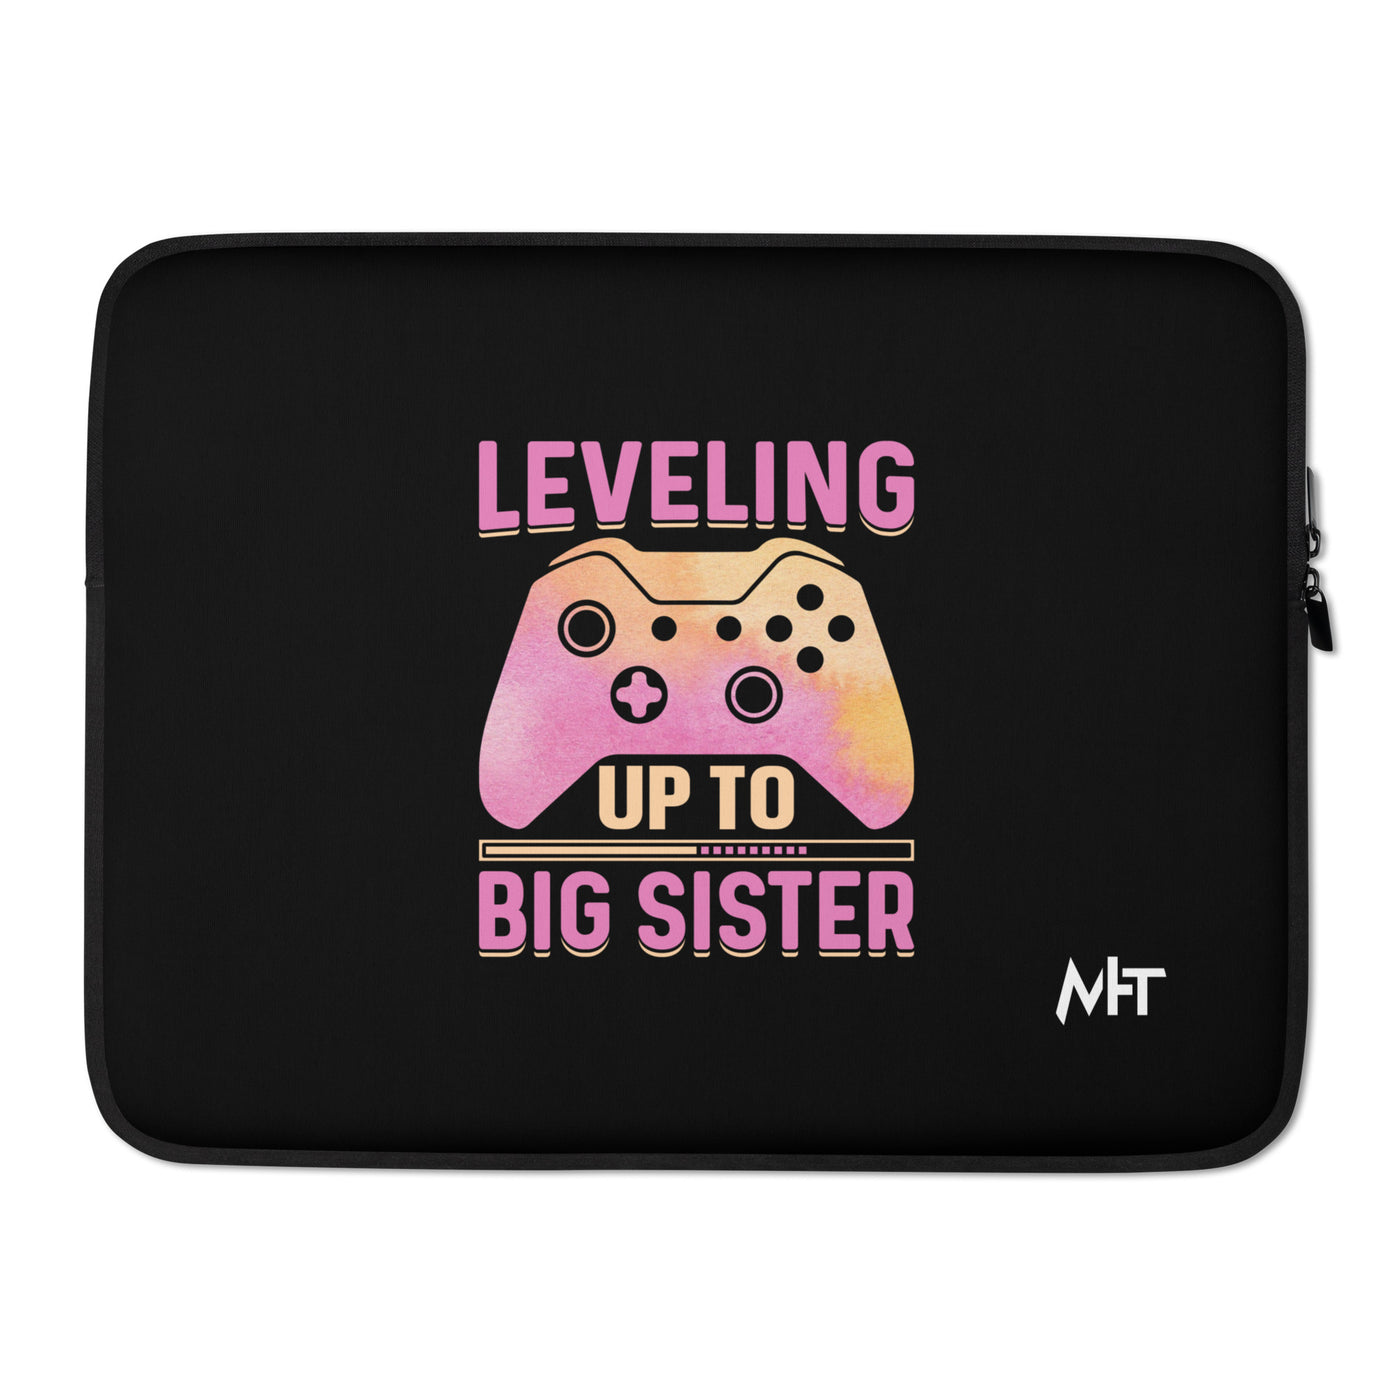 Levelling up to Big Sister - Laptop Sleeve